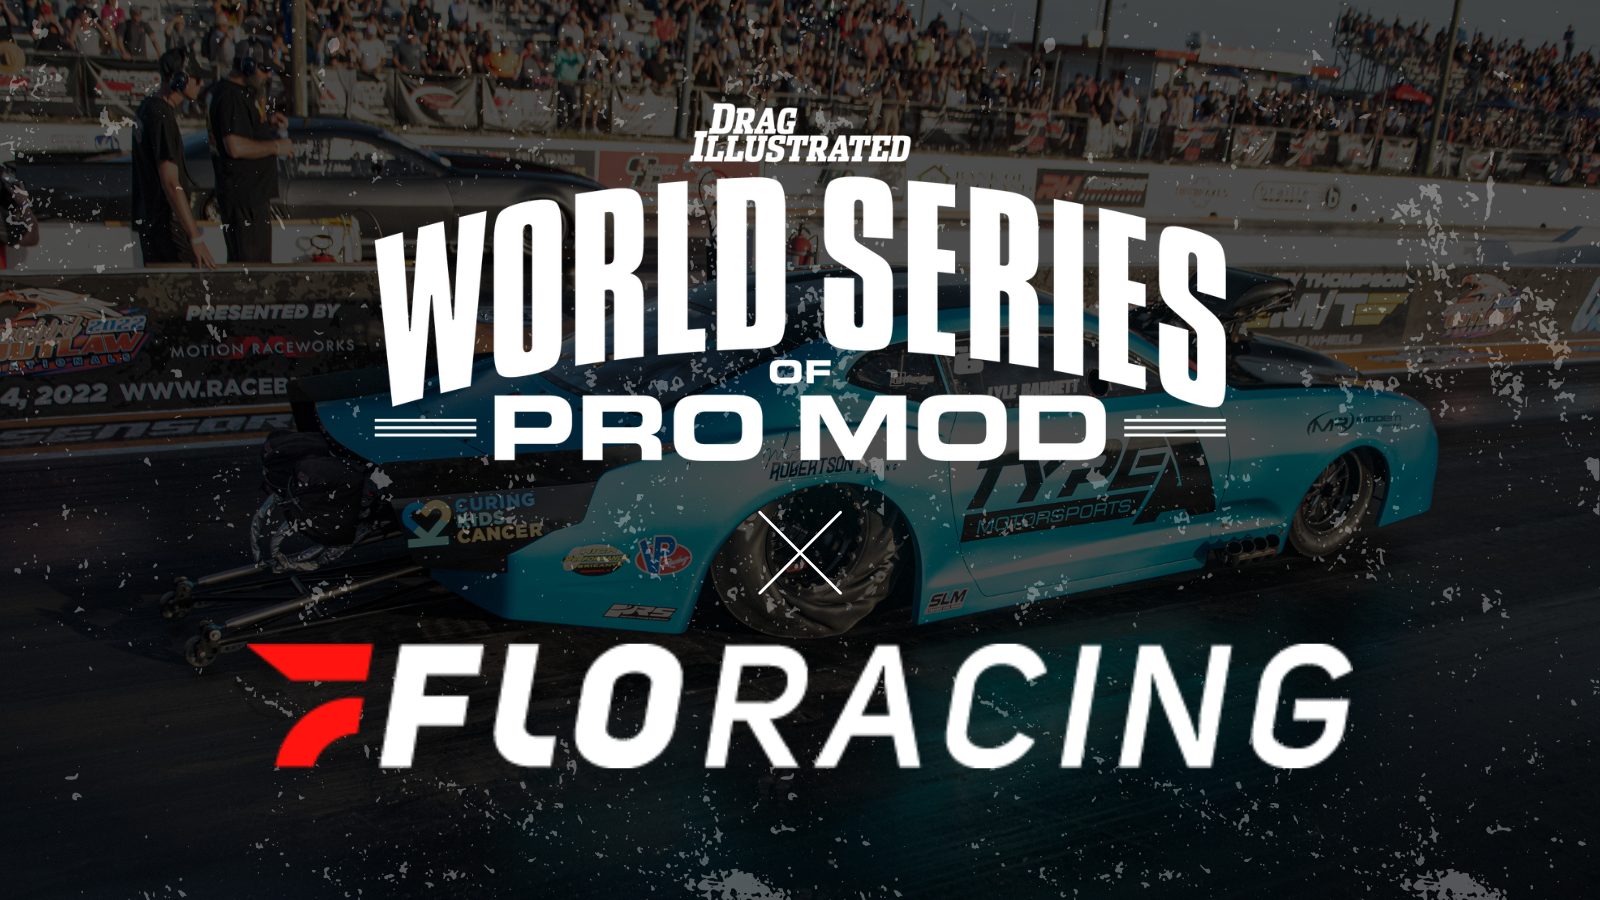 FloRacing Named Official Livestreaming Partner of World Series of Pro Mod Drag Illustrated Drag Racing News, Opinion, Interviews, Photos, Videos and More